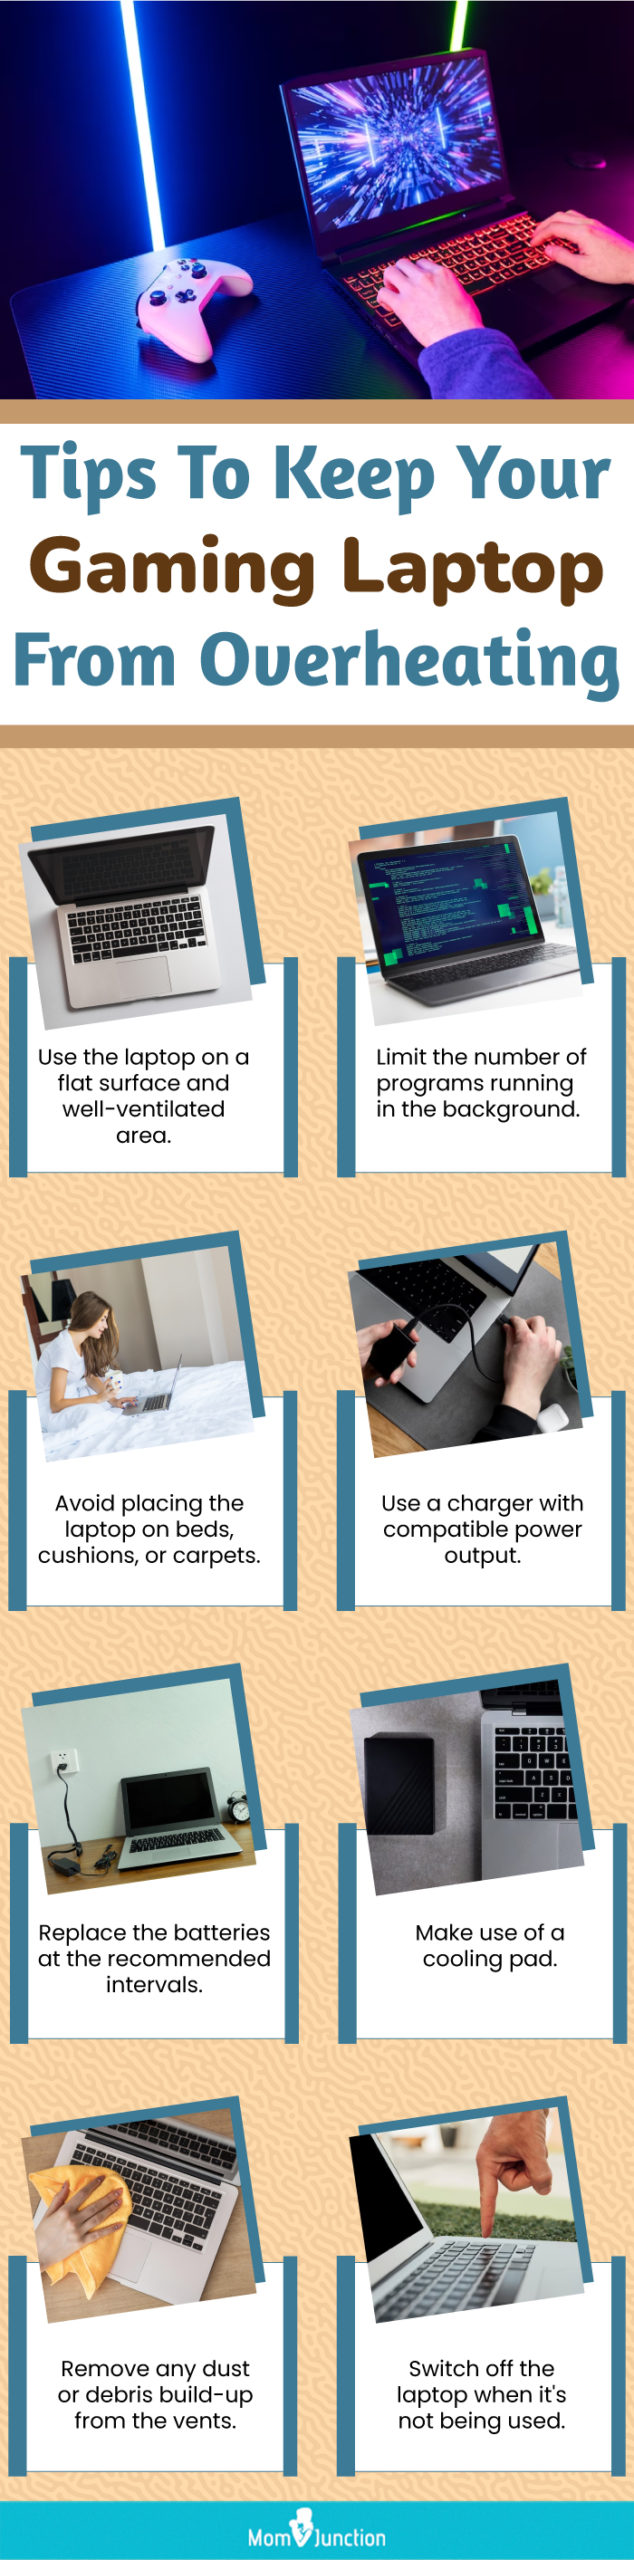 Tips To Keep Your Gaming Laptop From Overheating (infographic)